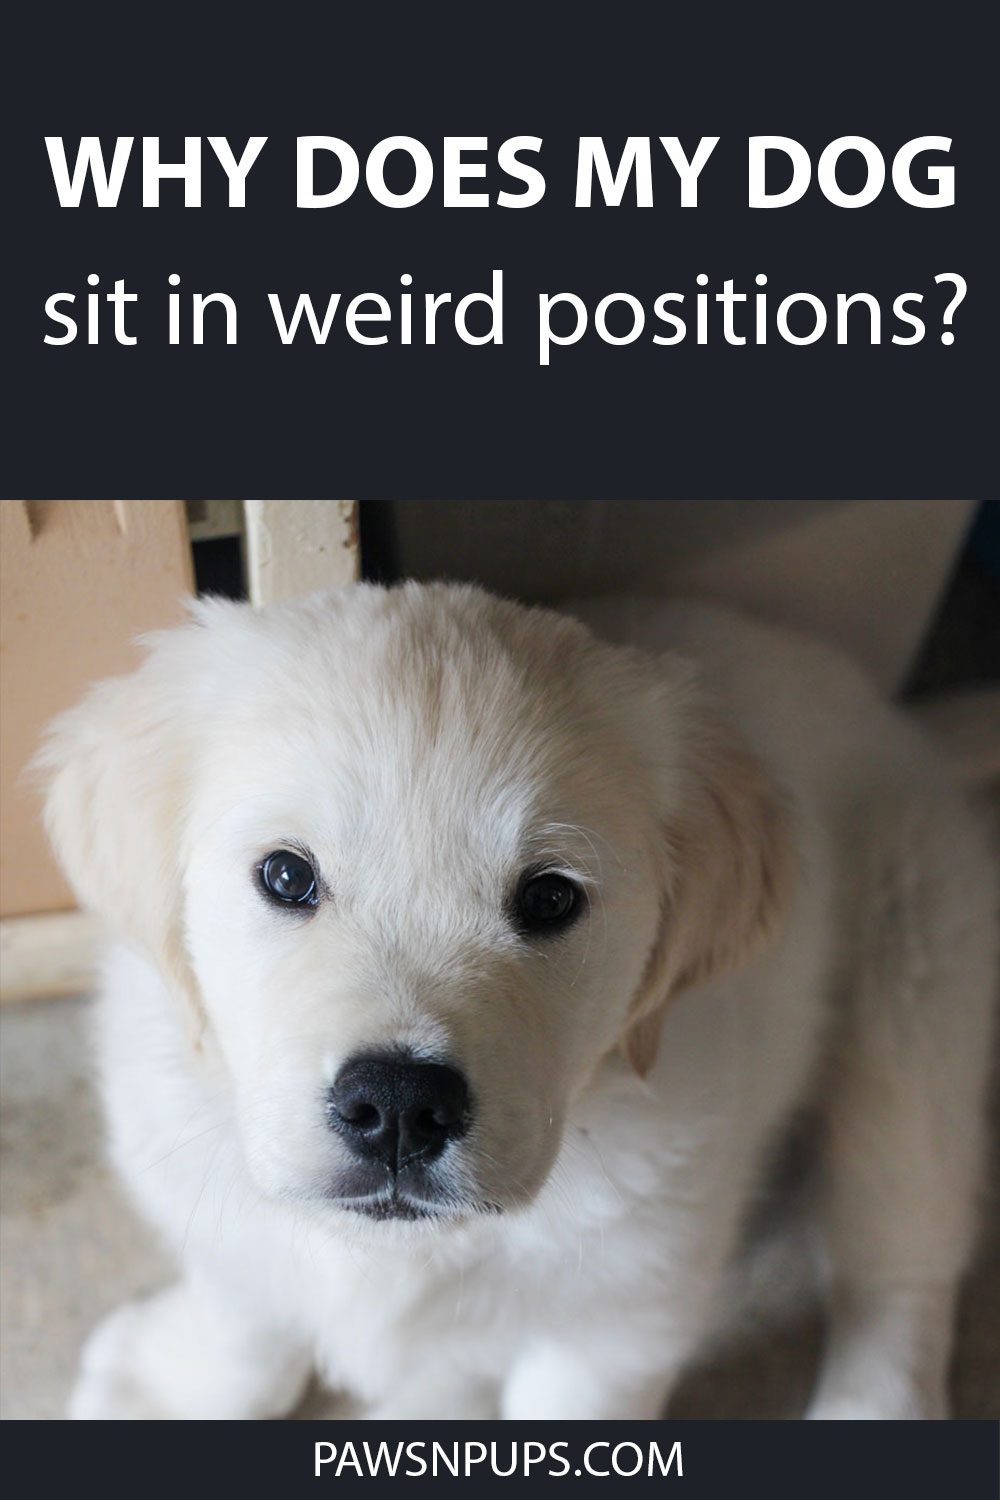 Why Does My Dog Sit In Weird Positions? - Golden Retriever puppy sitting and staring back at the camera.